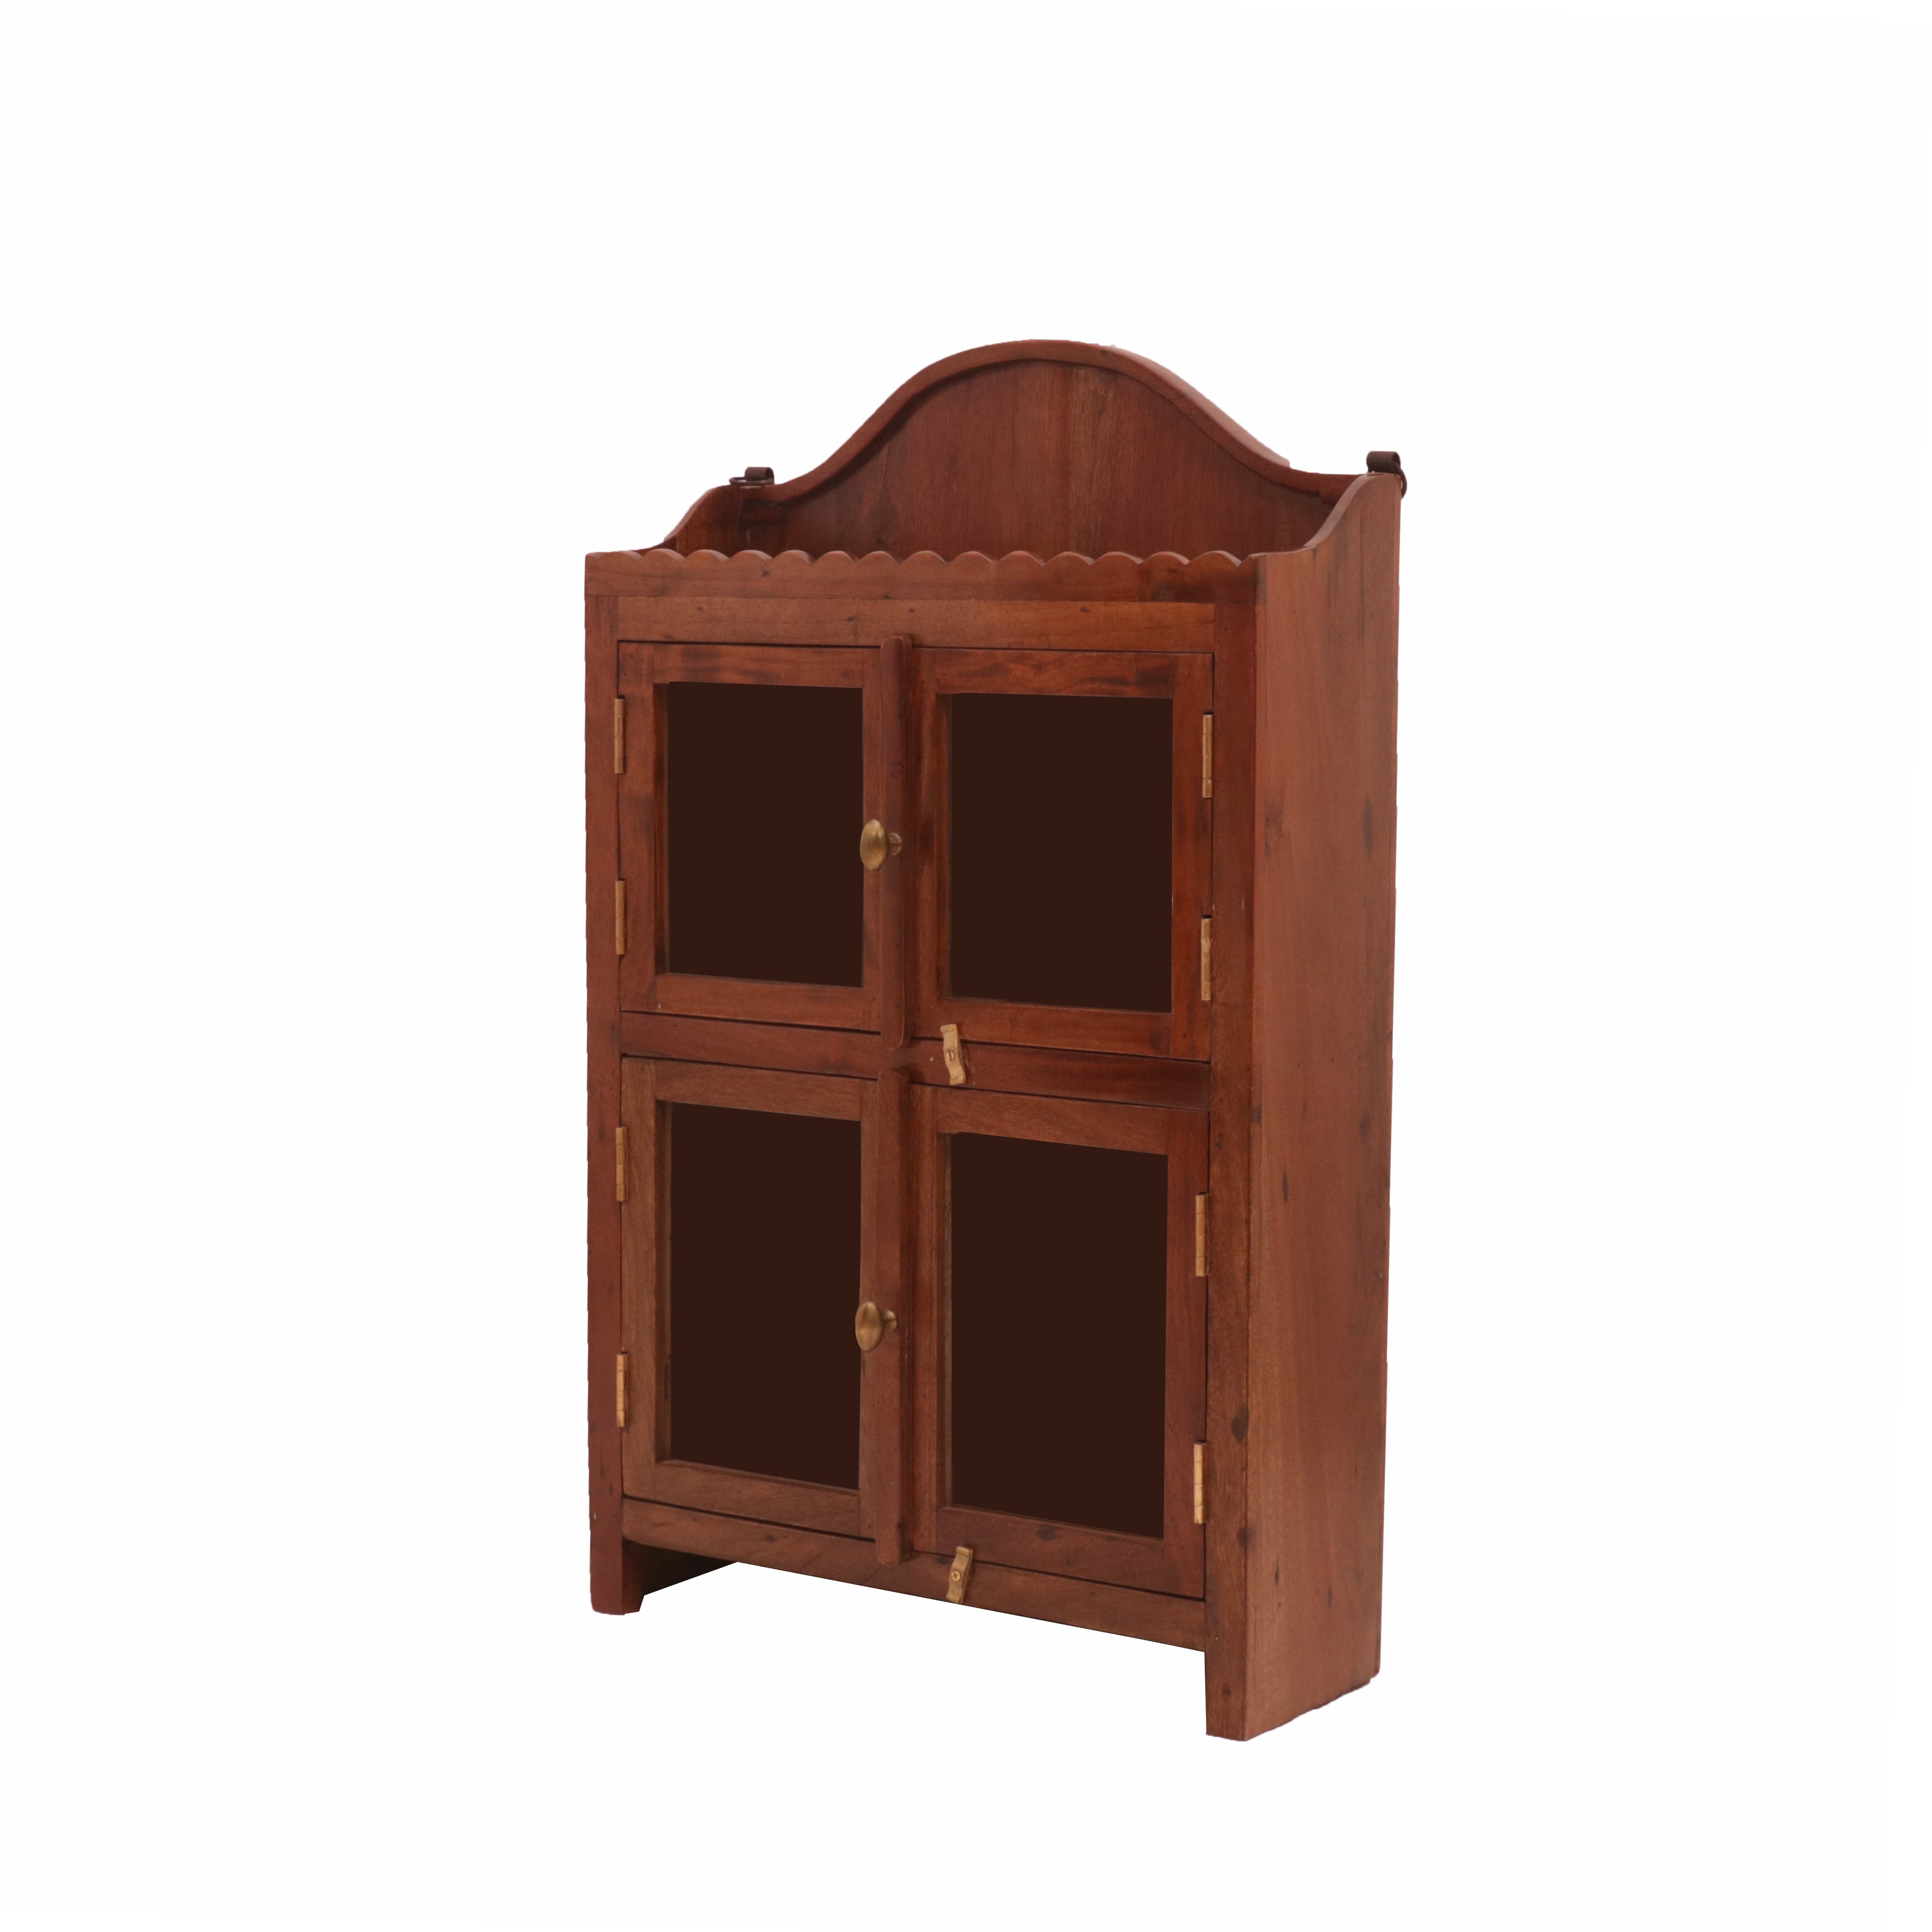 Two partitions & 1 Shelf Each Simple Glass and Wooden Cabinet Default Title Wall Cabinet